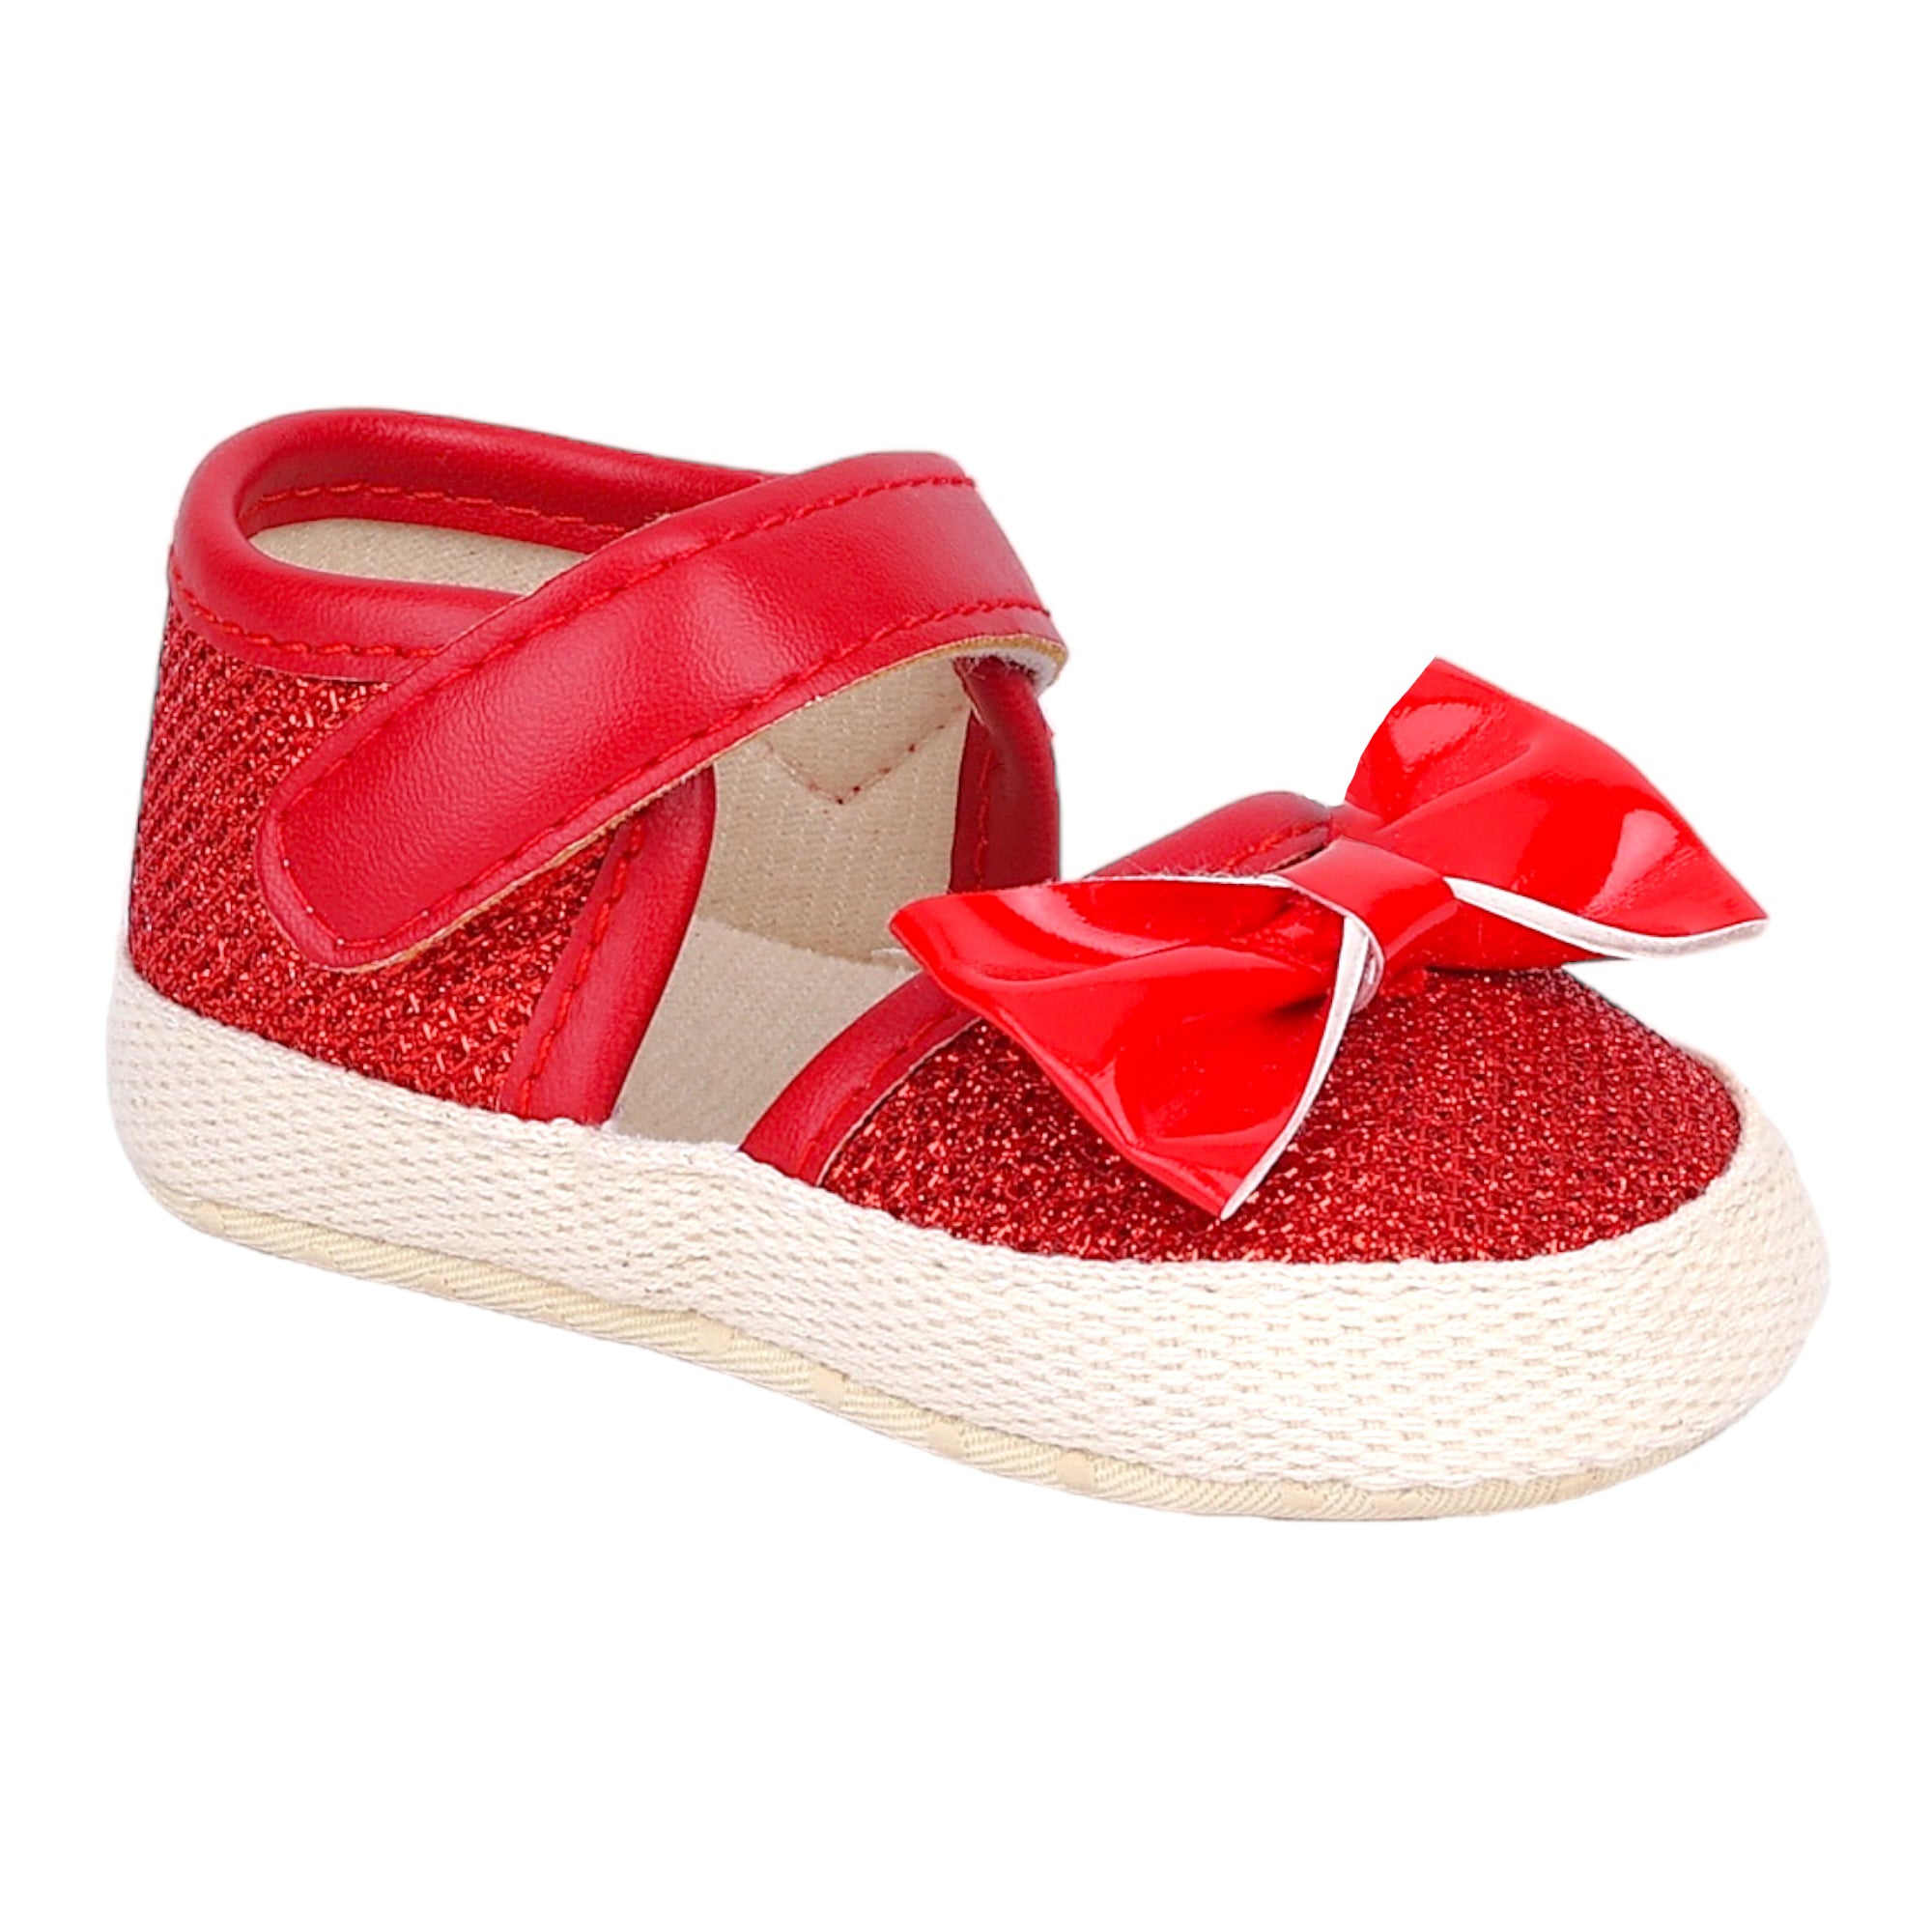 Baby Moo Glittery Partywear Bow Velcro Strap Anti-Skid Sandals - Red